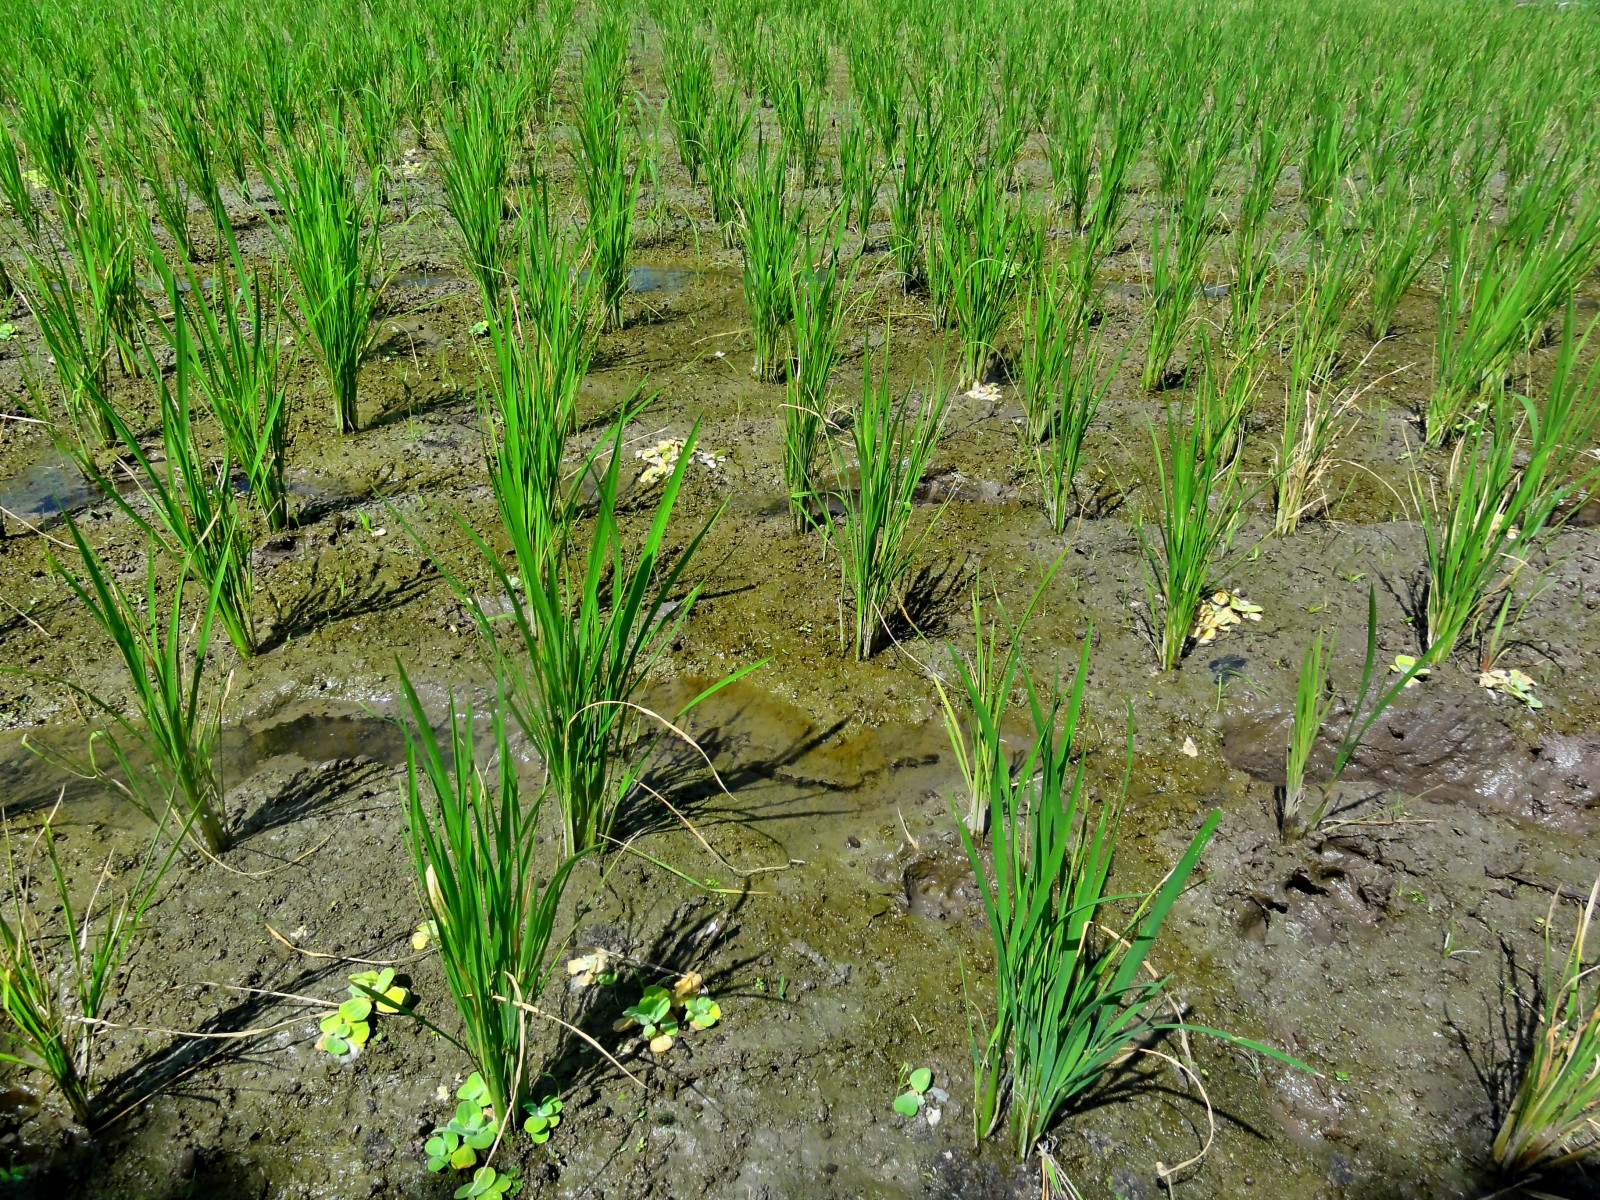 The solution does not grow in rice paddies